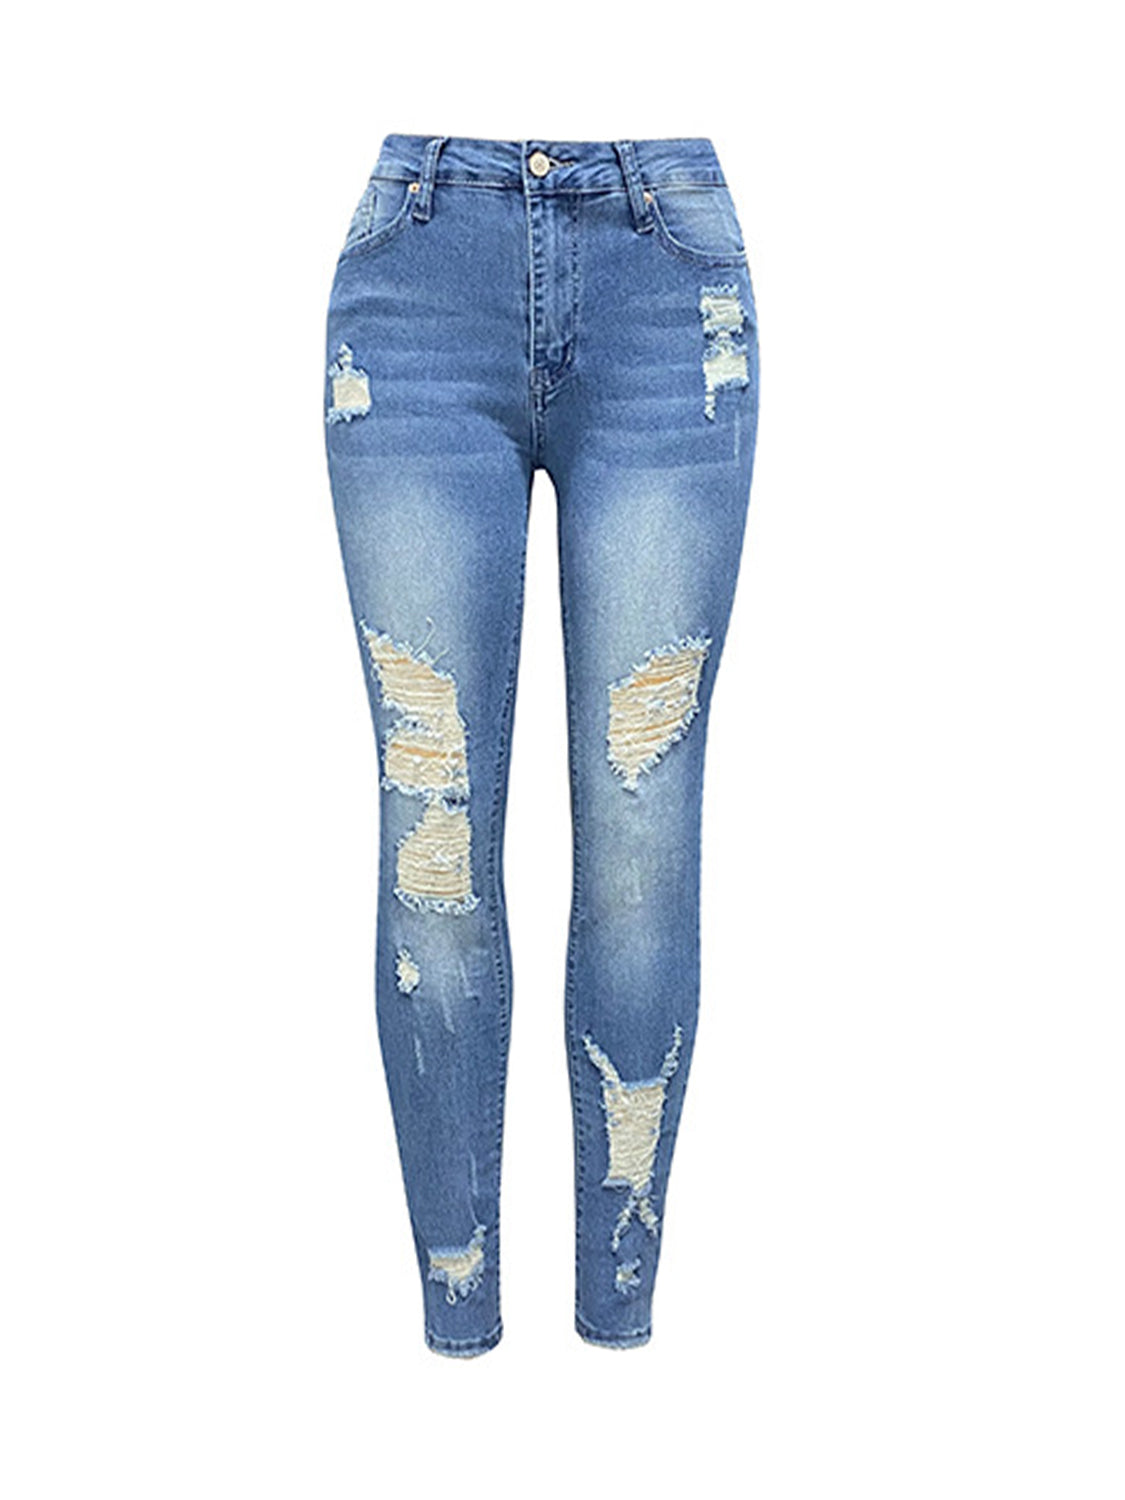 Distressed Buttoned Jeans with Pockets apparel & accessories